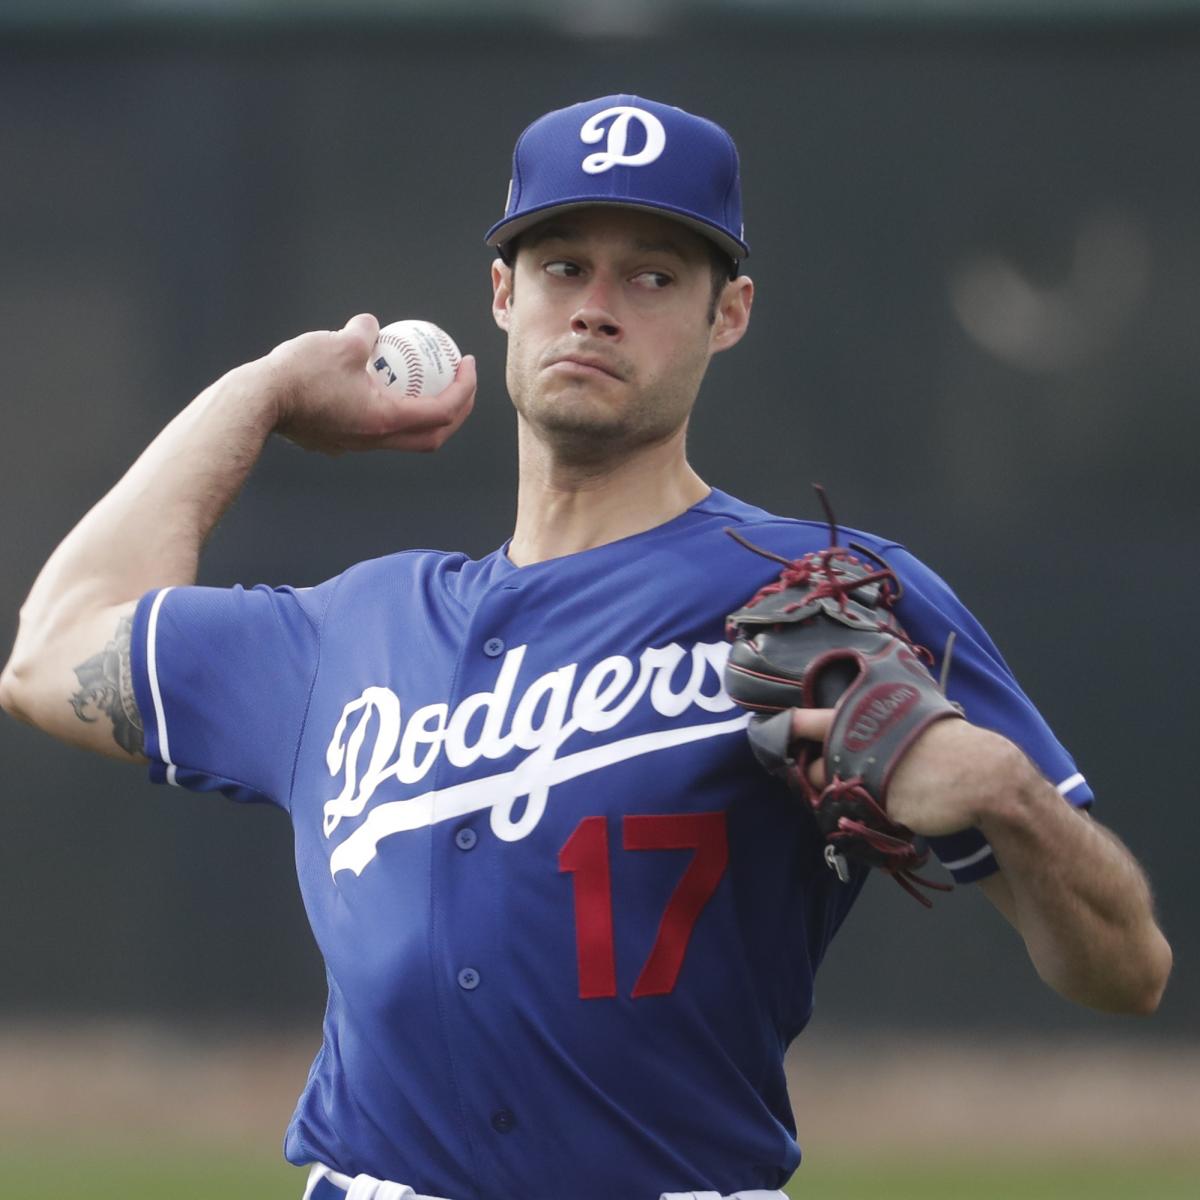 Dodgers trade addition Joe Kelly instantly pays off in win over Reds, but  questions linger for L.A. pitching staff